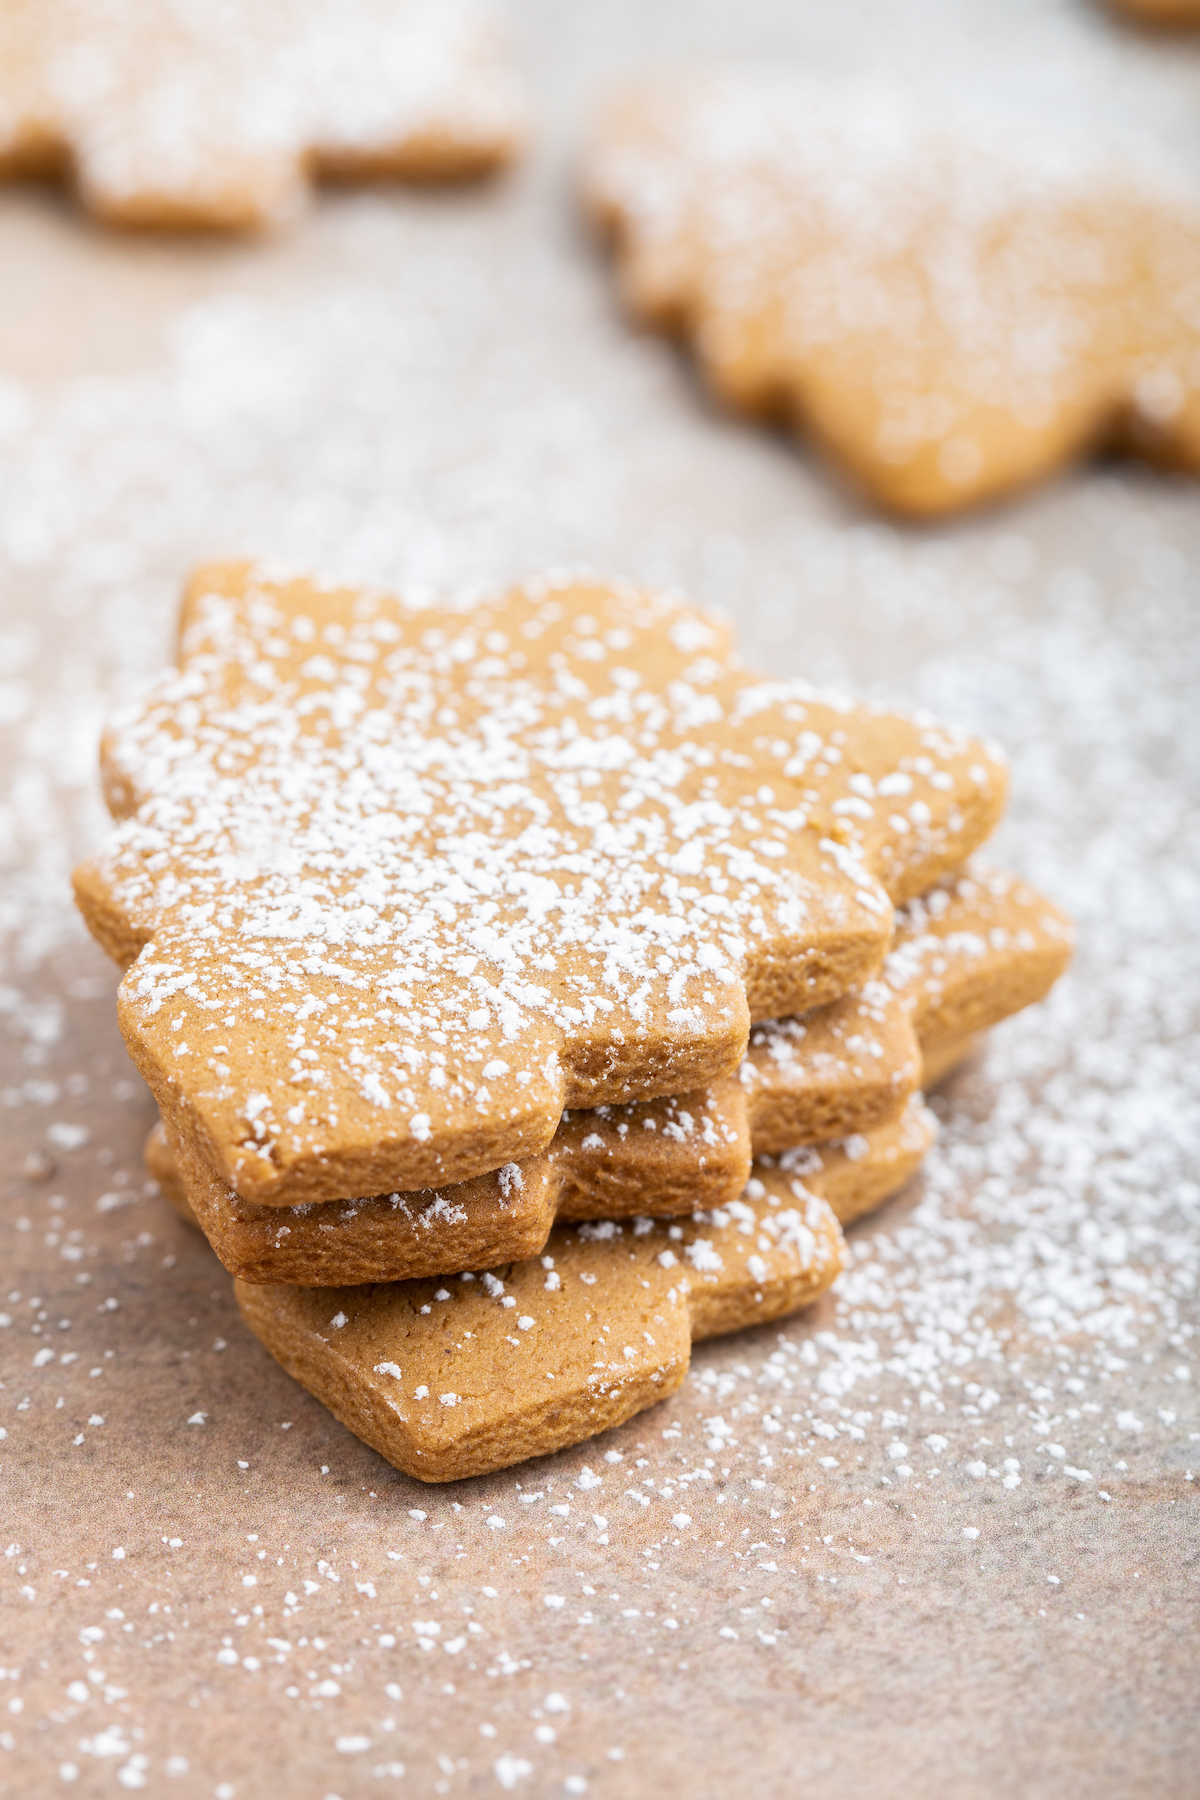 Three molasses cookies dusted with powdered sugar and stacked on top of each other.